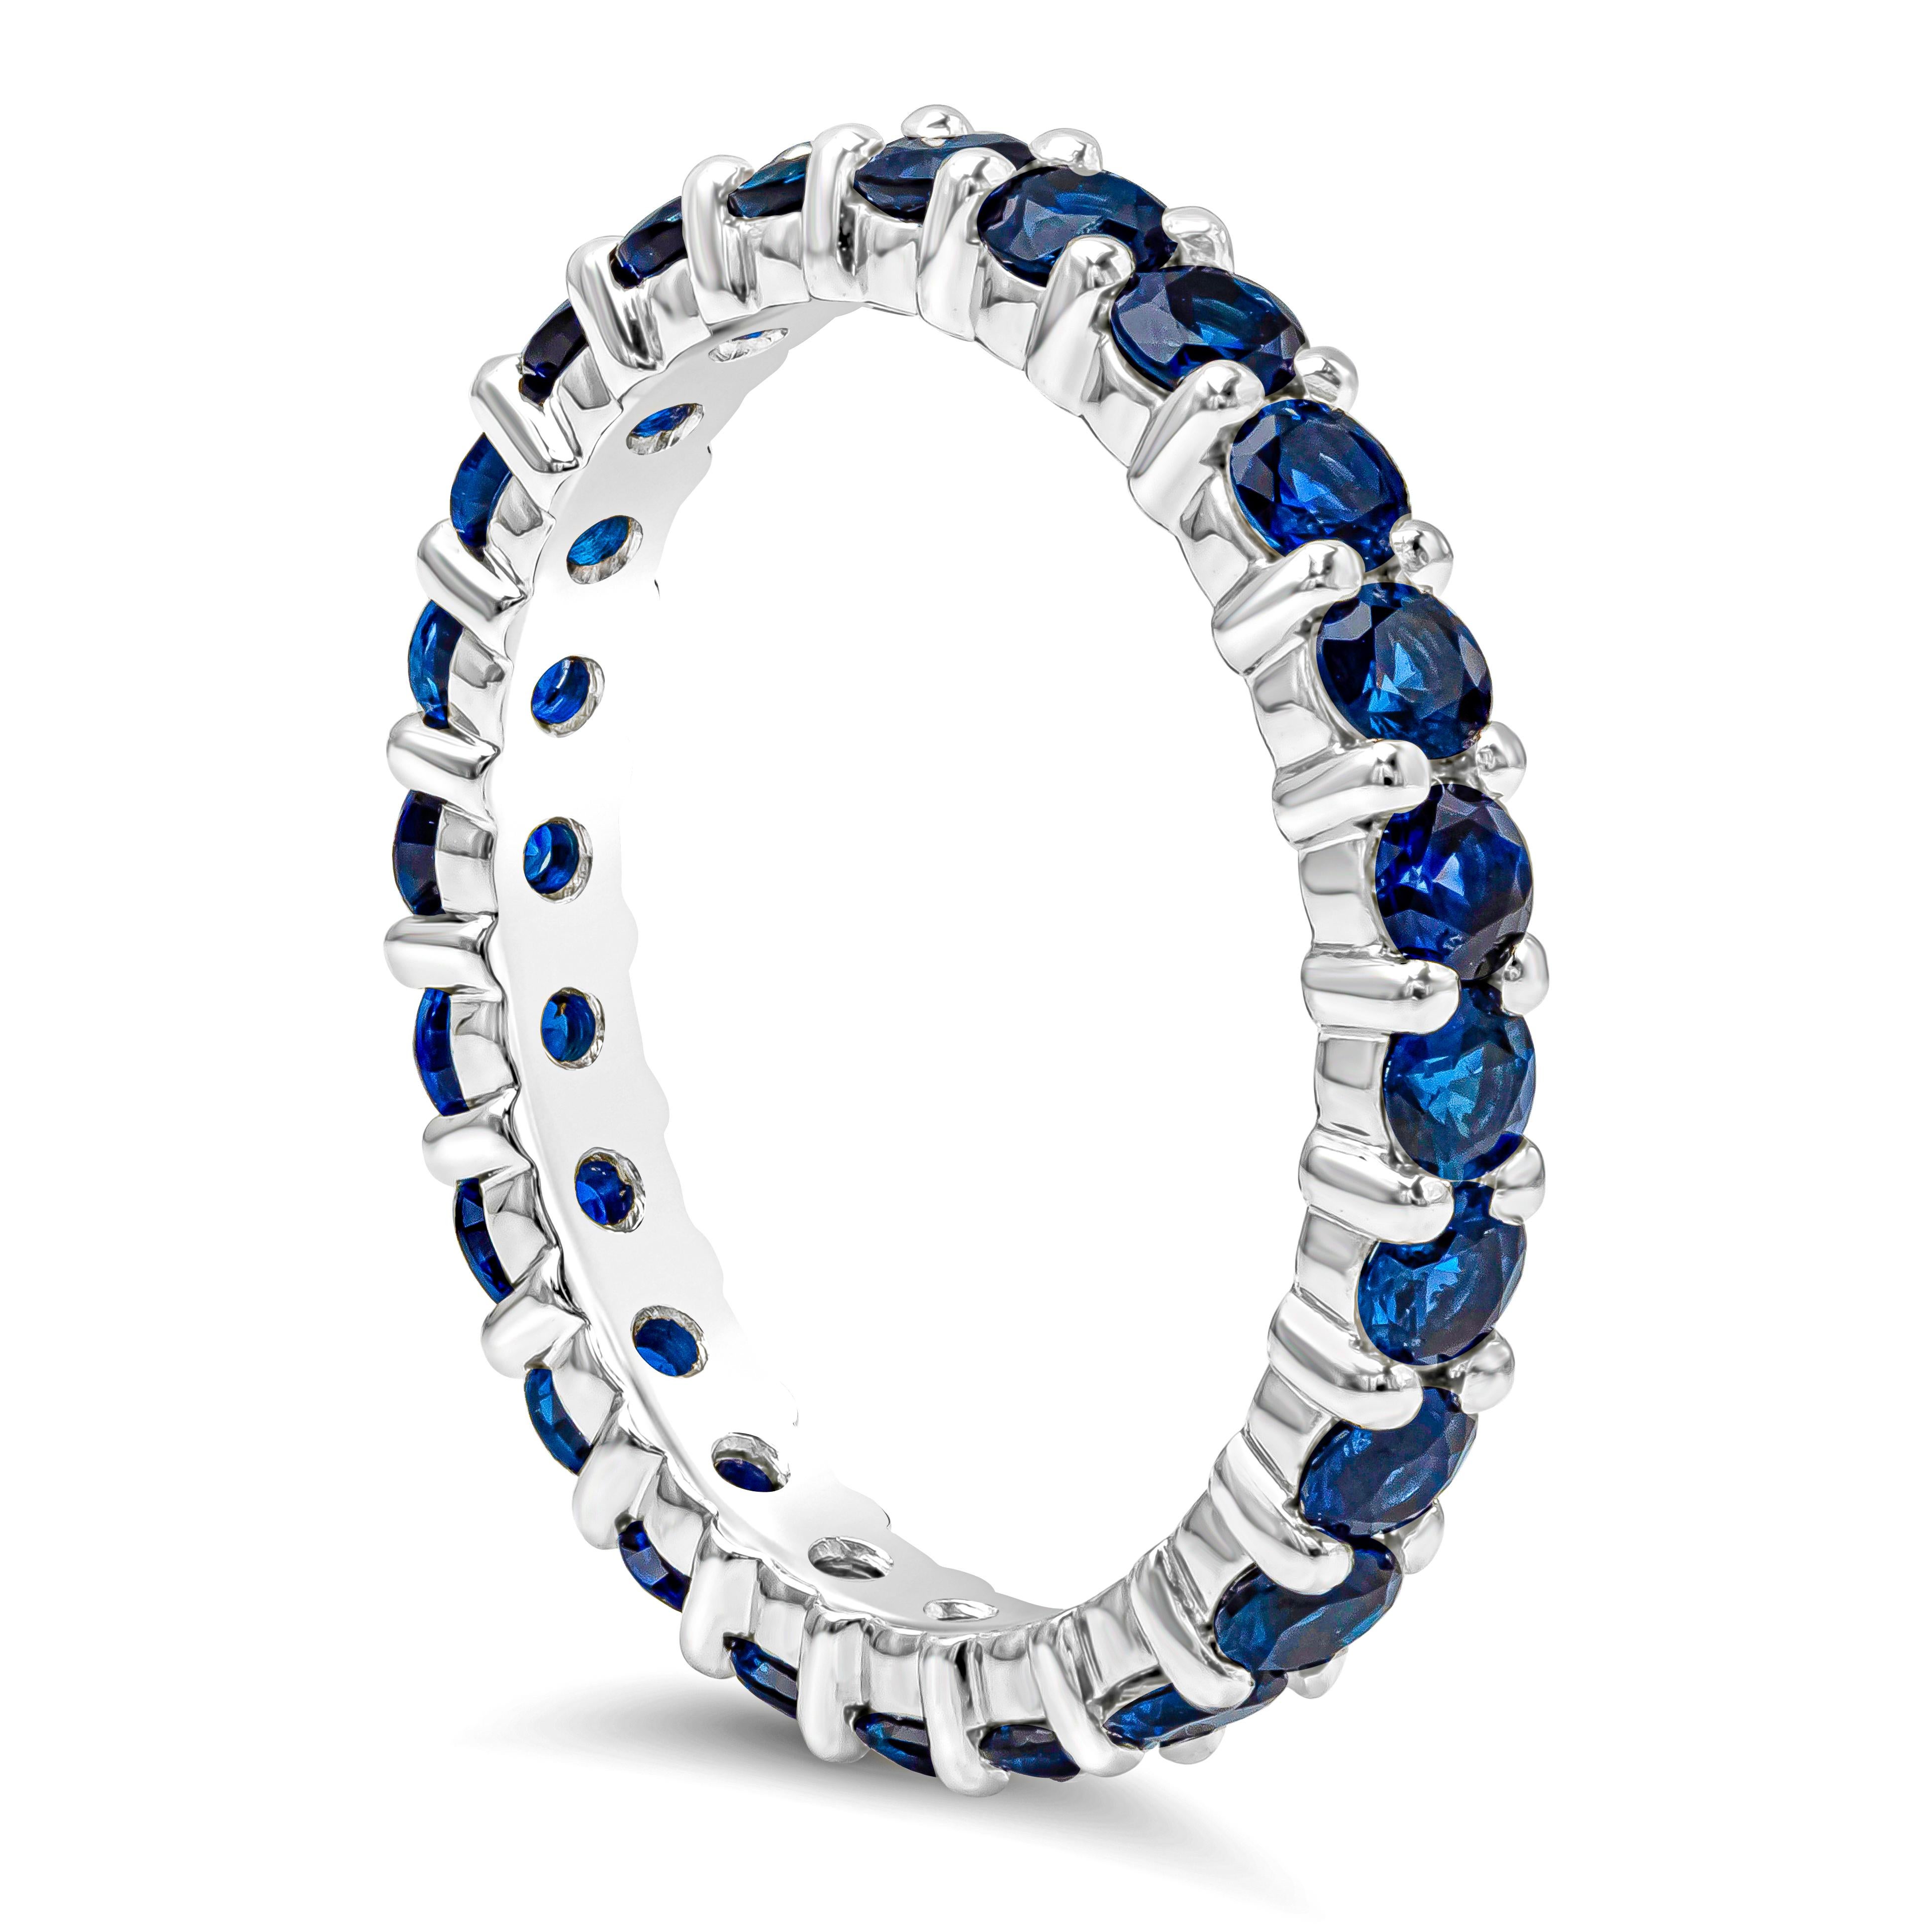 A beautiful and stackable wedding band showcasing a row of color-rich blue sapphires weighing 1.91 carats total and VS in clarity, set in a shared-prong setting, Made in 18K White Gold and Size 6 US resizable upon request.

Style available in